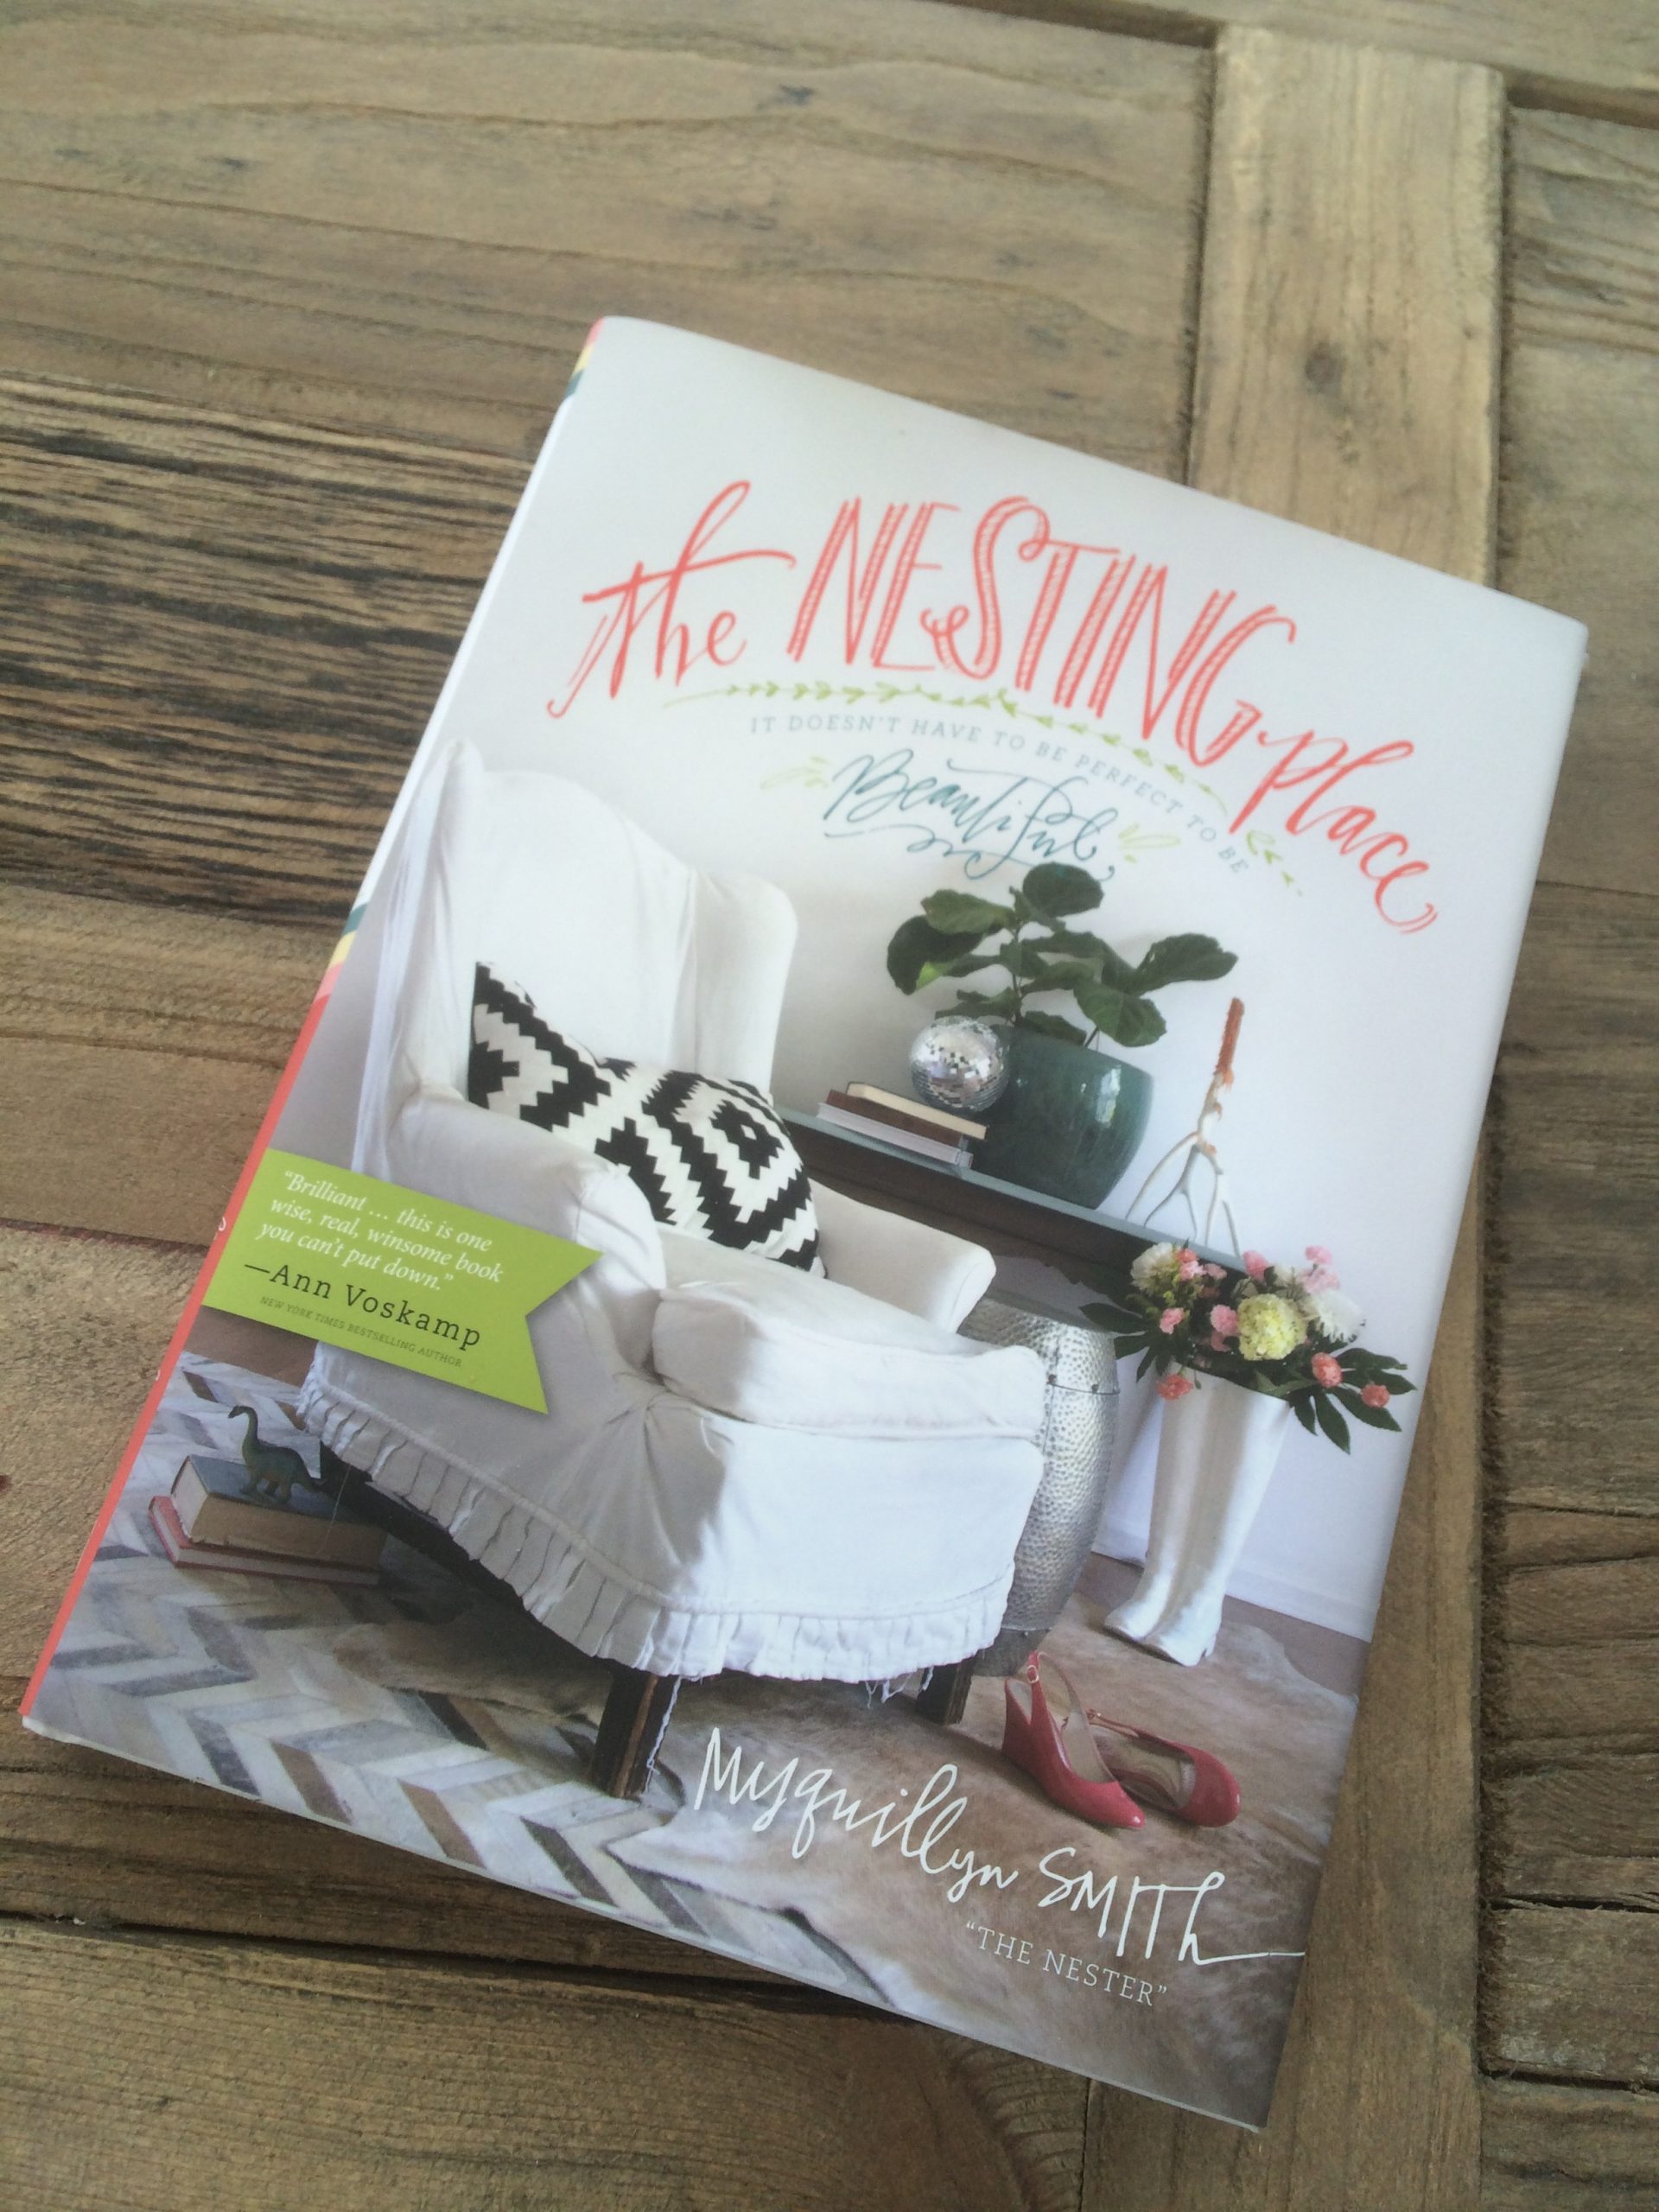 Link Party Palooza — and The Nesting Place Giveaway!